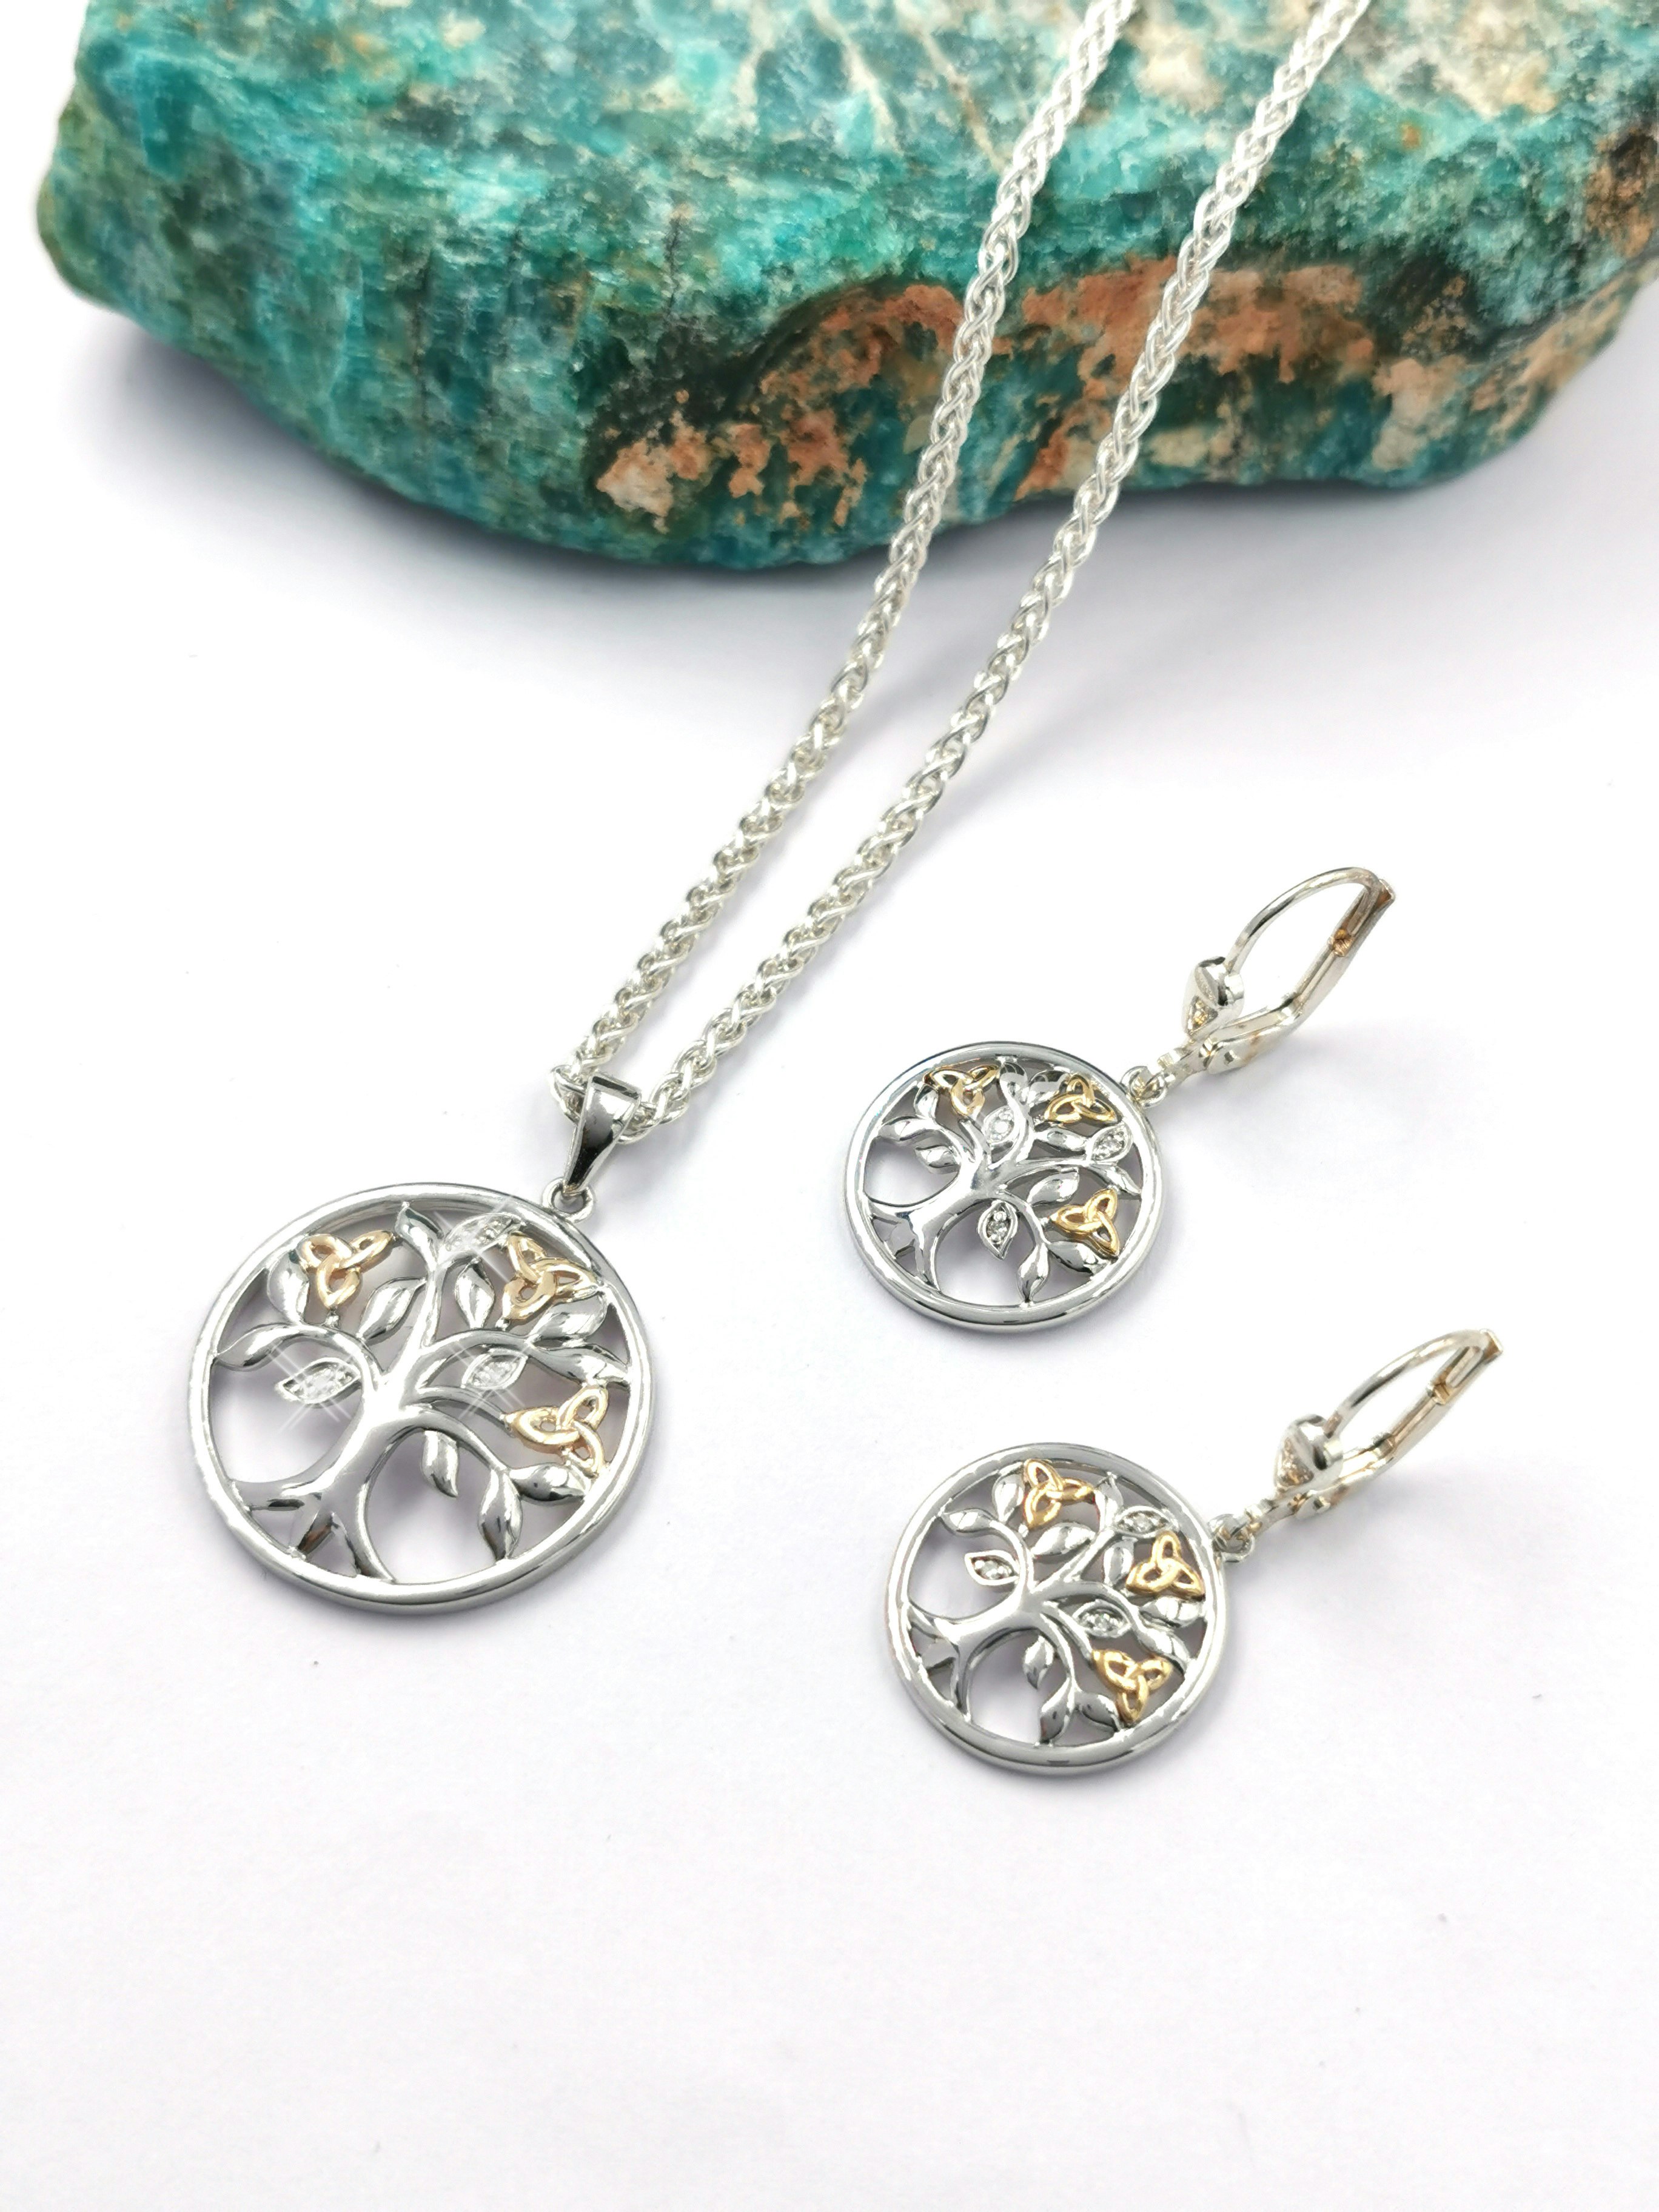 Tree of Life necklace and earrings set